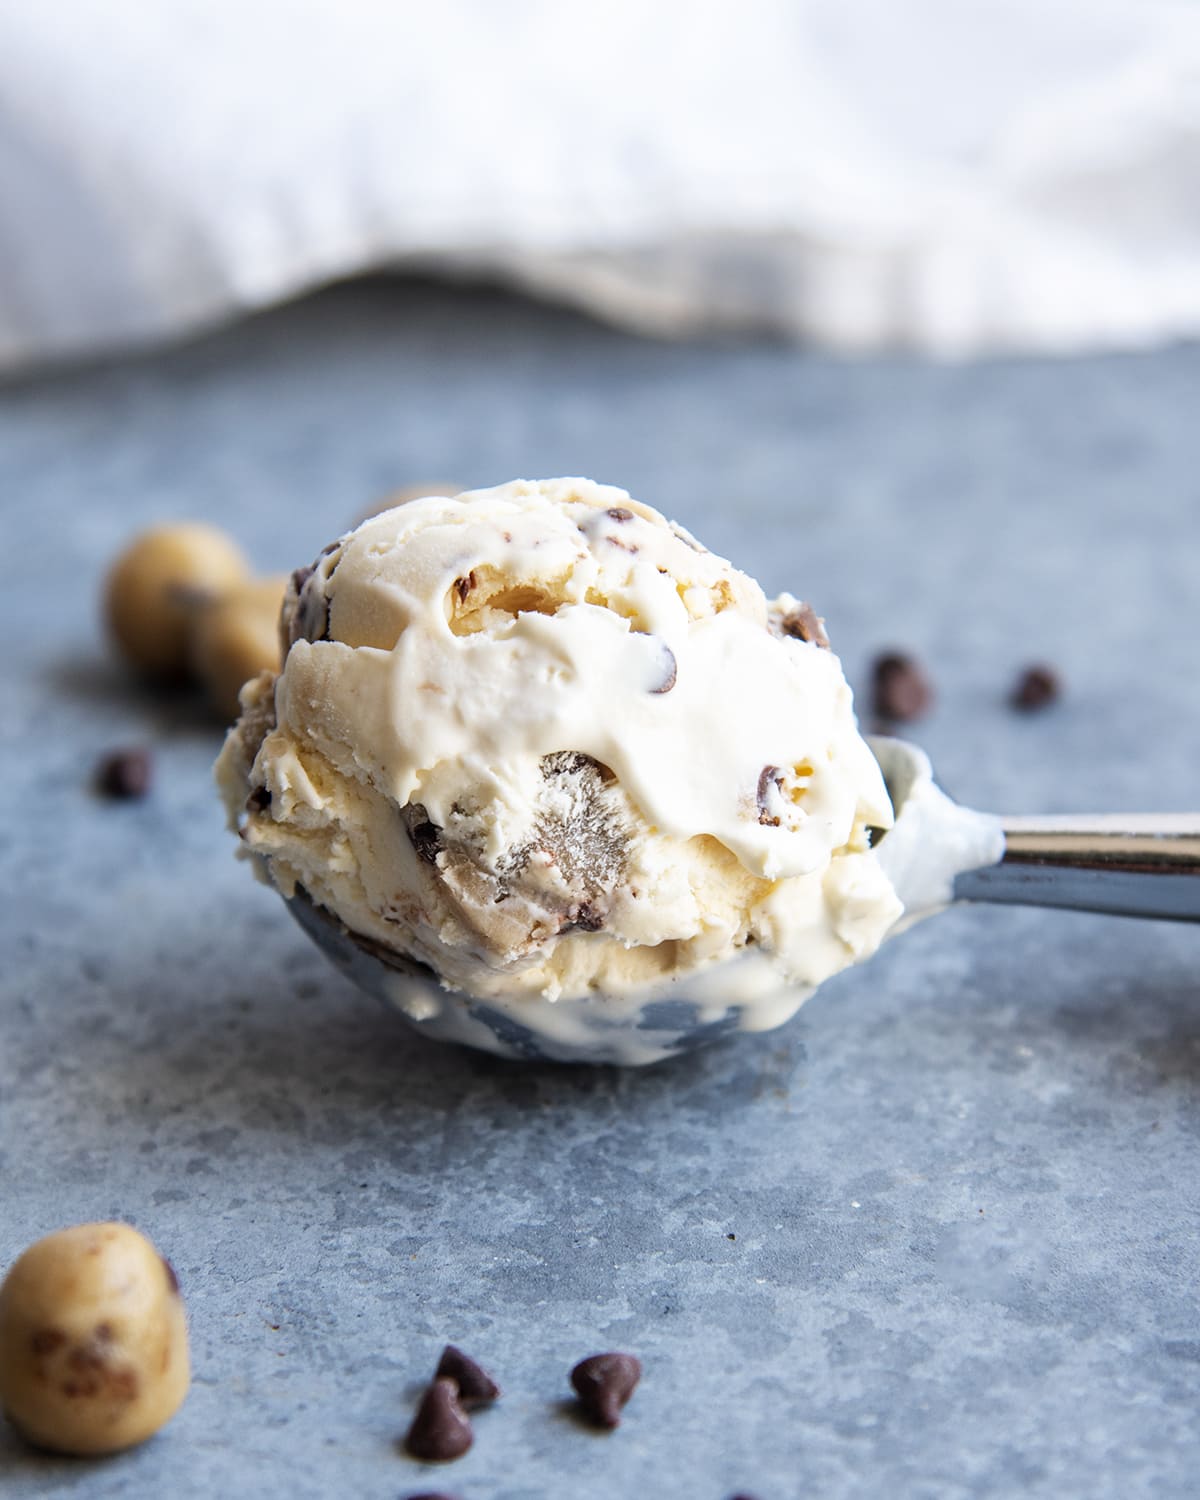 A scoop of chocolate chips cookie dough ice cream on a gray surface.